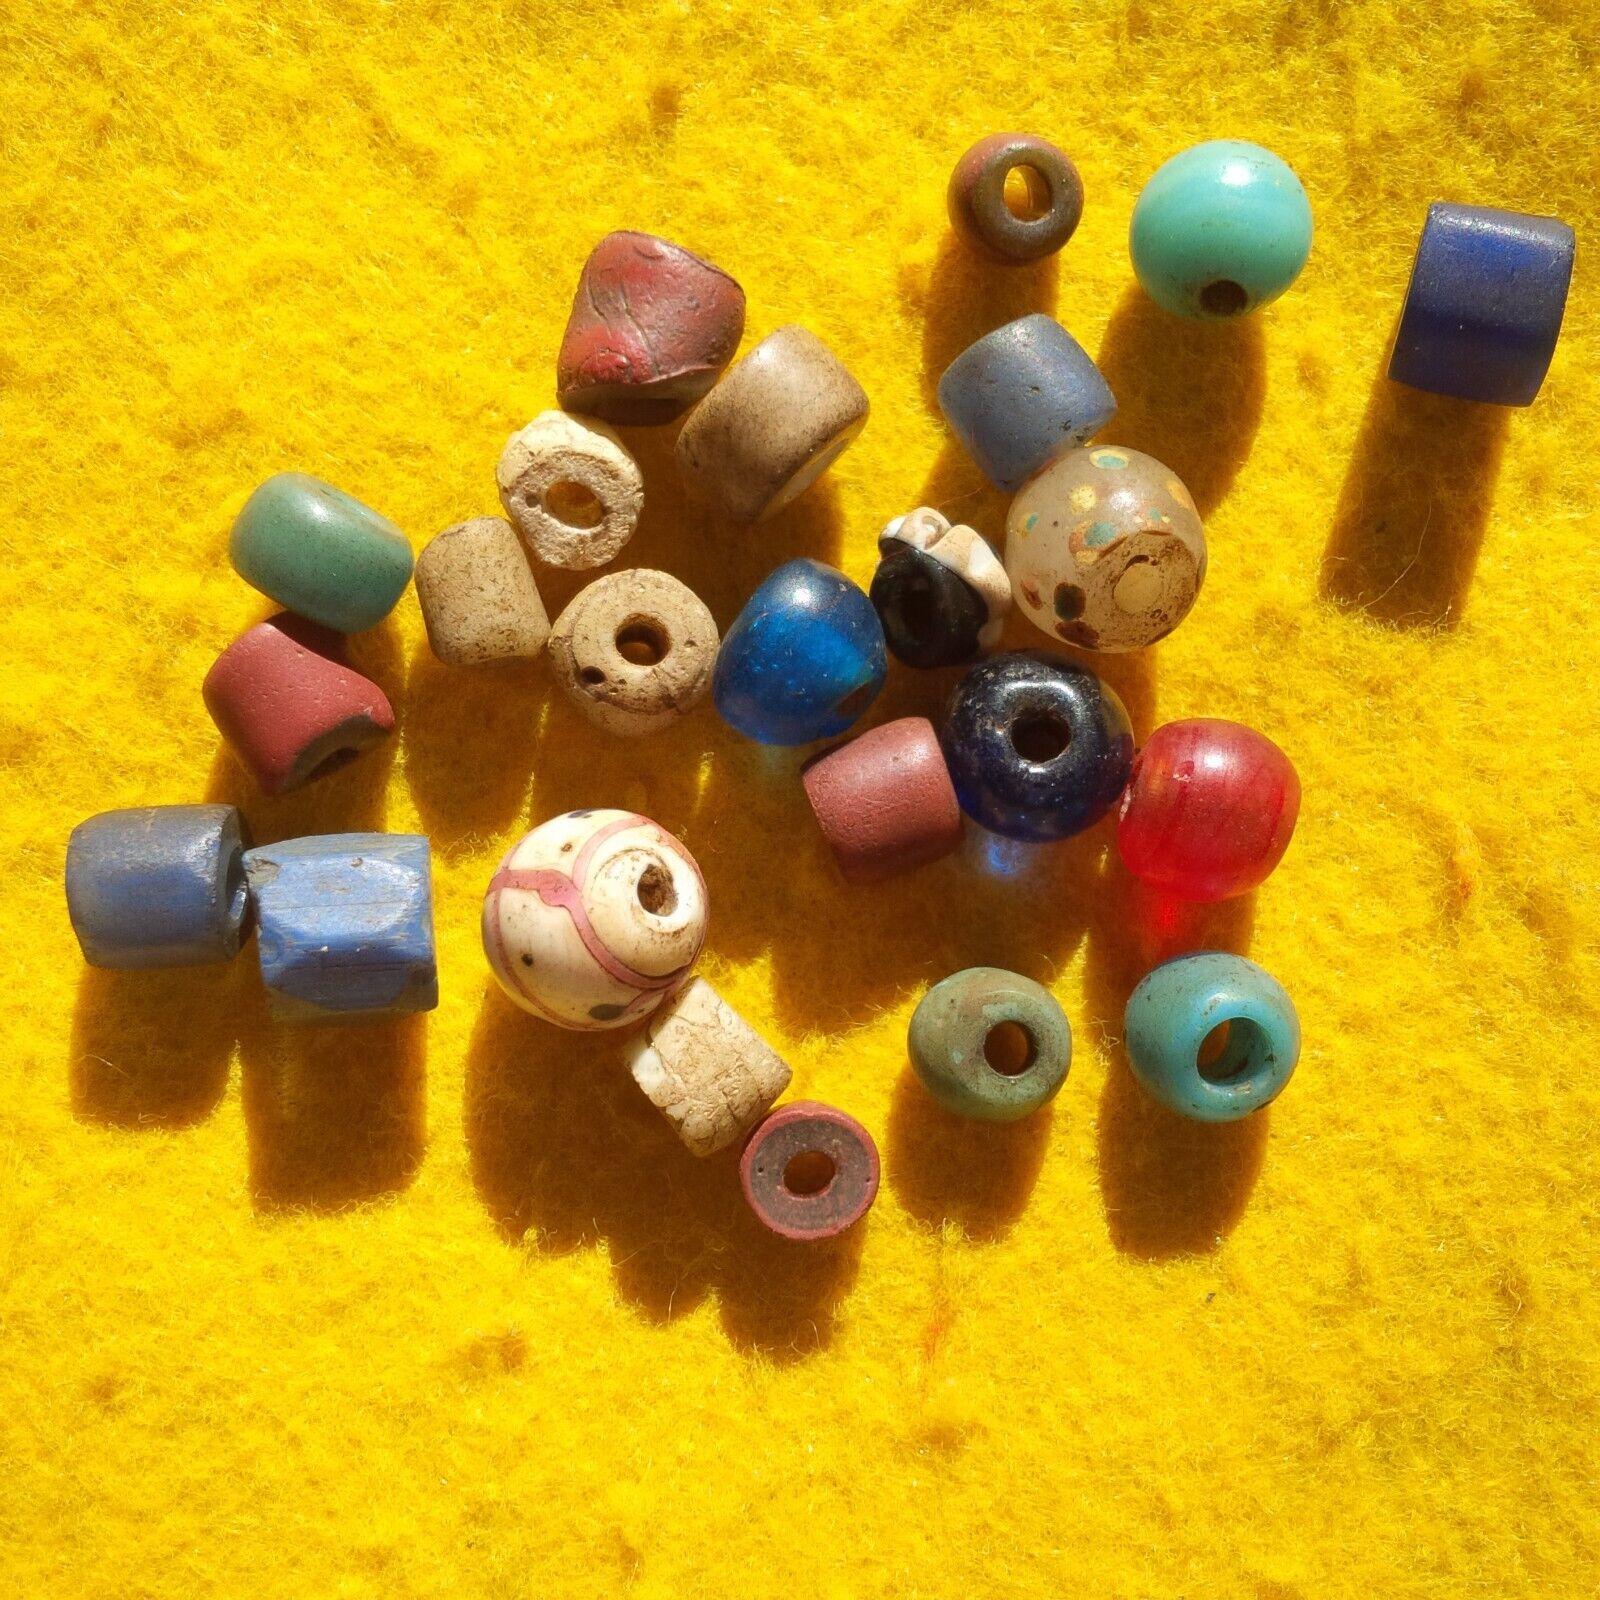 24 ANTIQUE TRADE BEADS NEW MEXICO ARROWHEADS 1800\'S TRADE BEADS WITH NICE PATINA